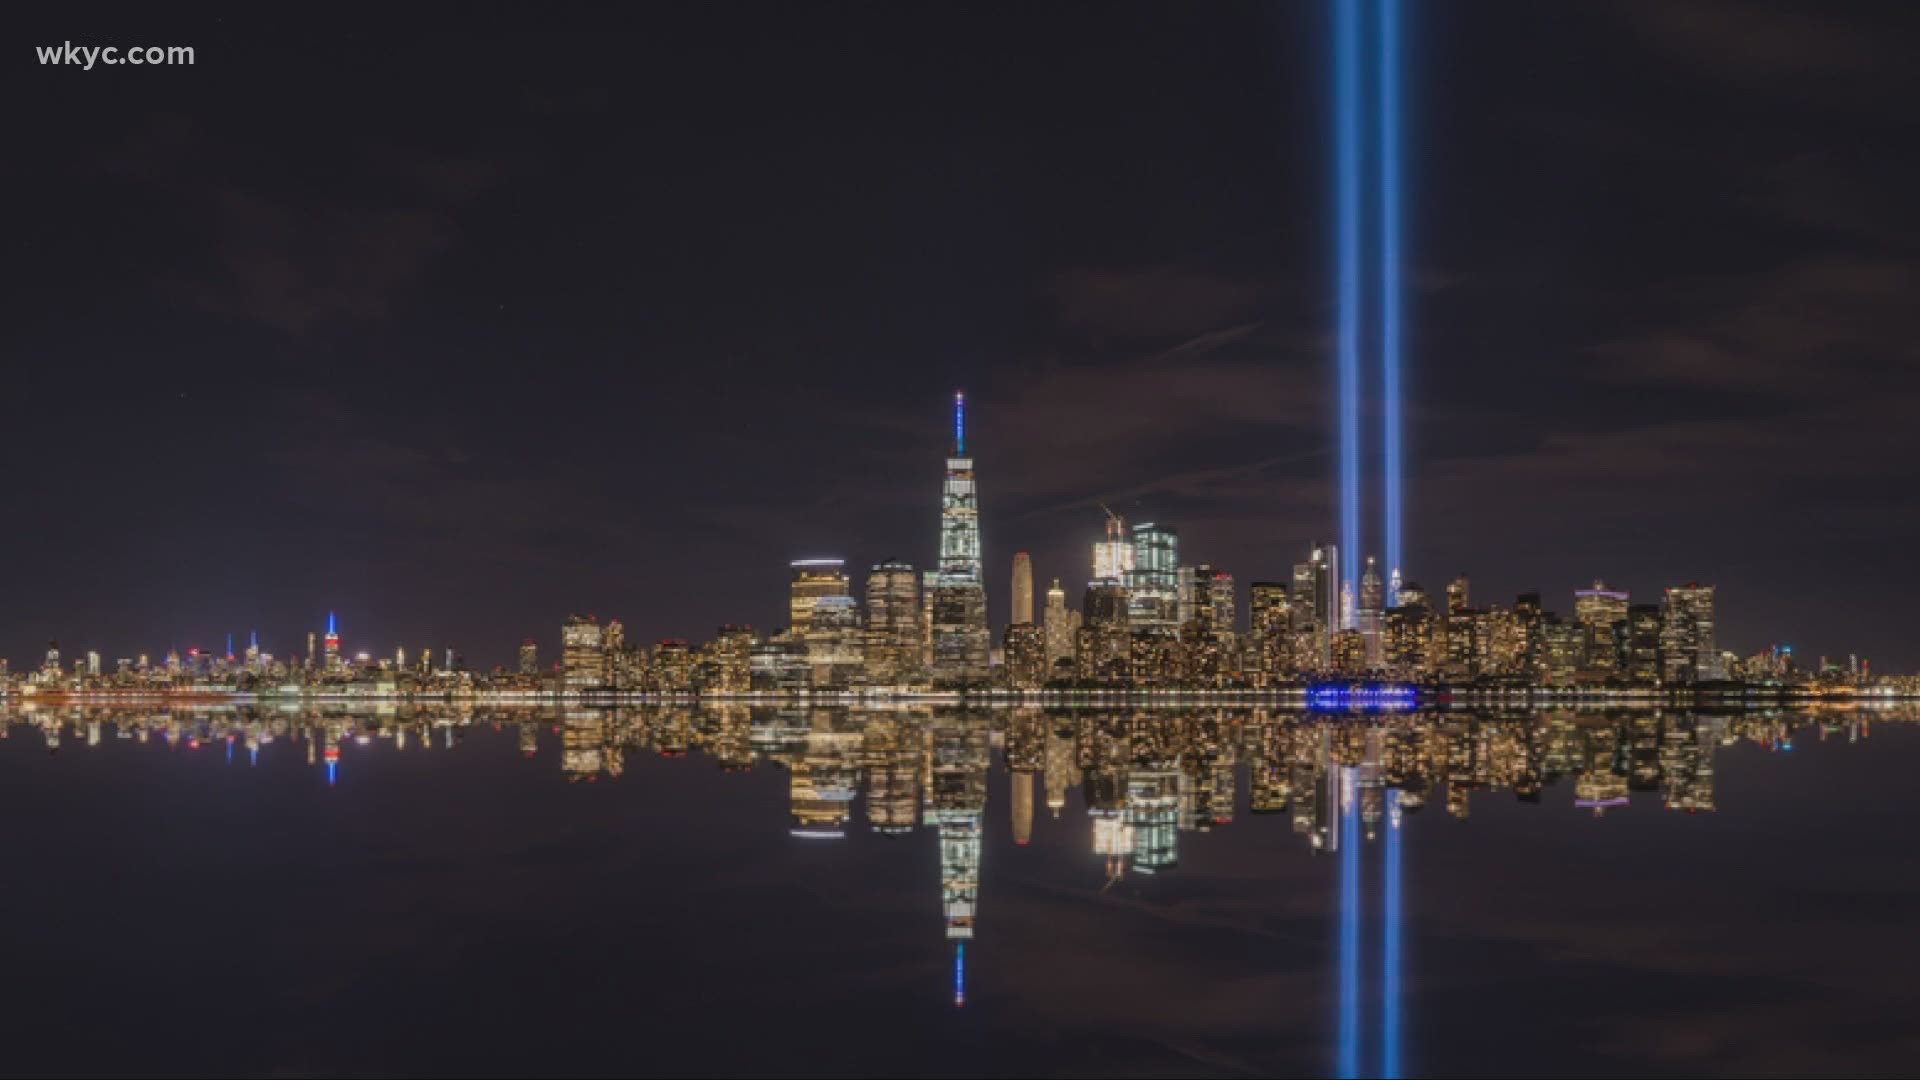 The beams of light in New York will not shine due to the coronavirus. The beams will be replaced with blue lights on buildings in Manhattan this year.